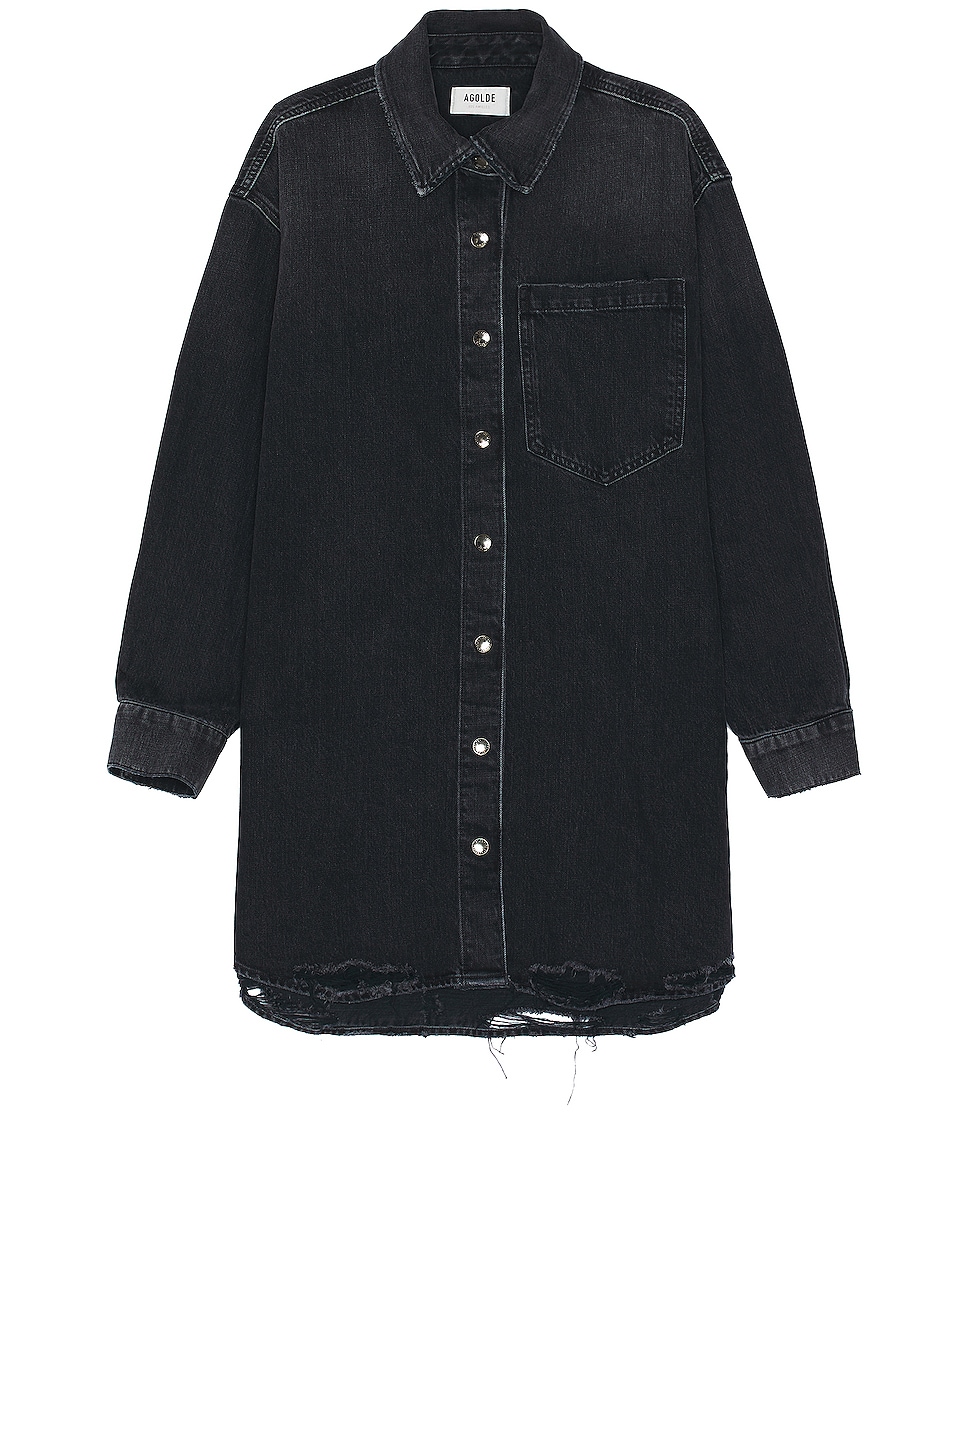 Image 1 of AGOLDE Lucas Denim Shirt in Disappear